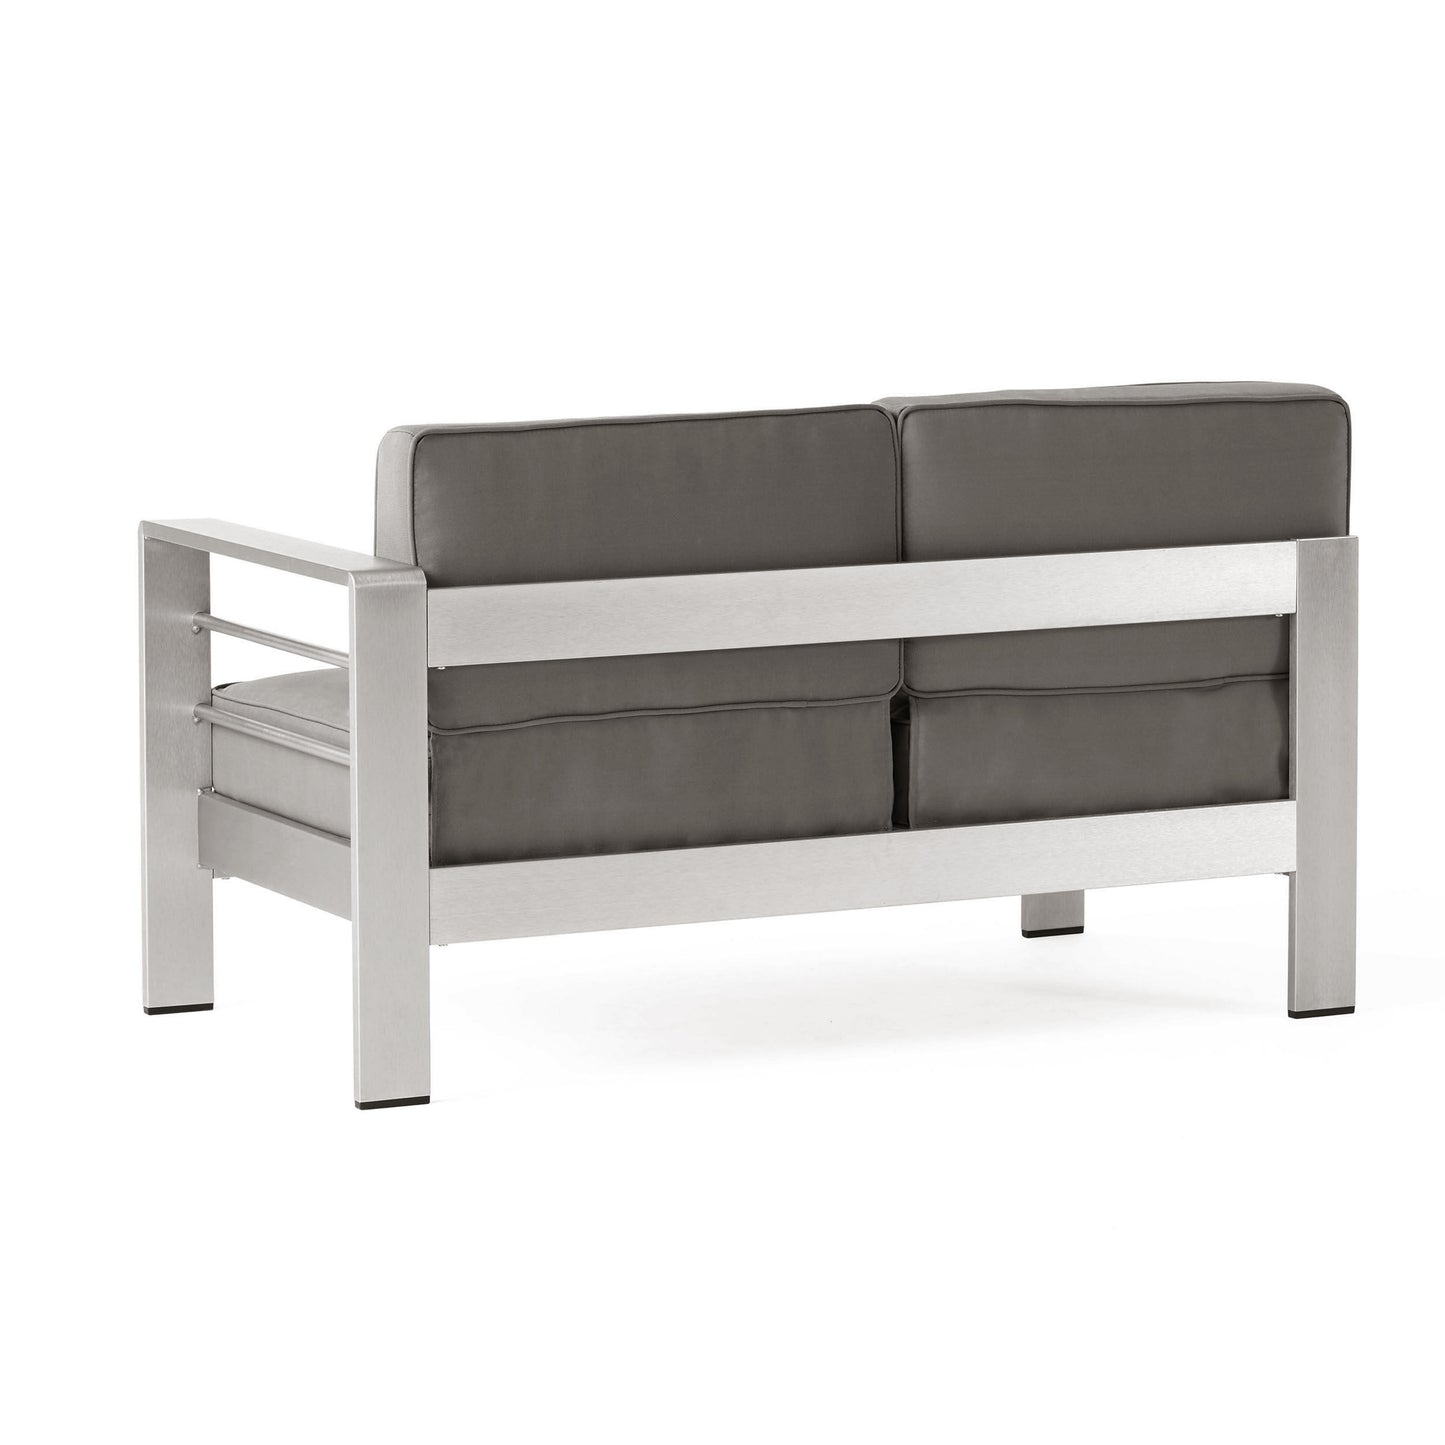 Emily Coral Outdoor Aluminum 8-Seater Sectional Sofa Set with Coffee Table and Ottomans, Silver and Khaki